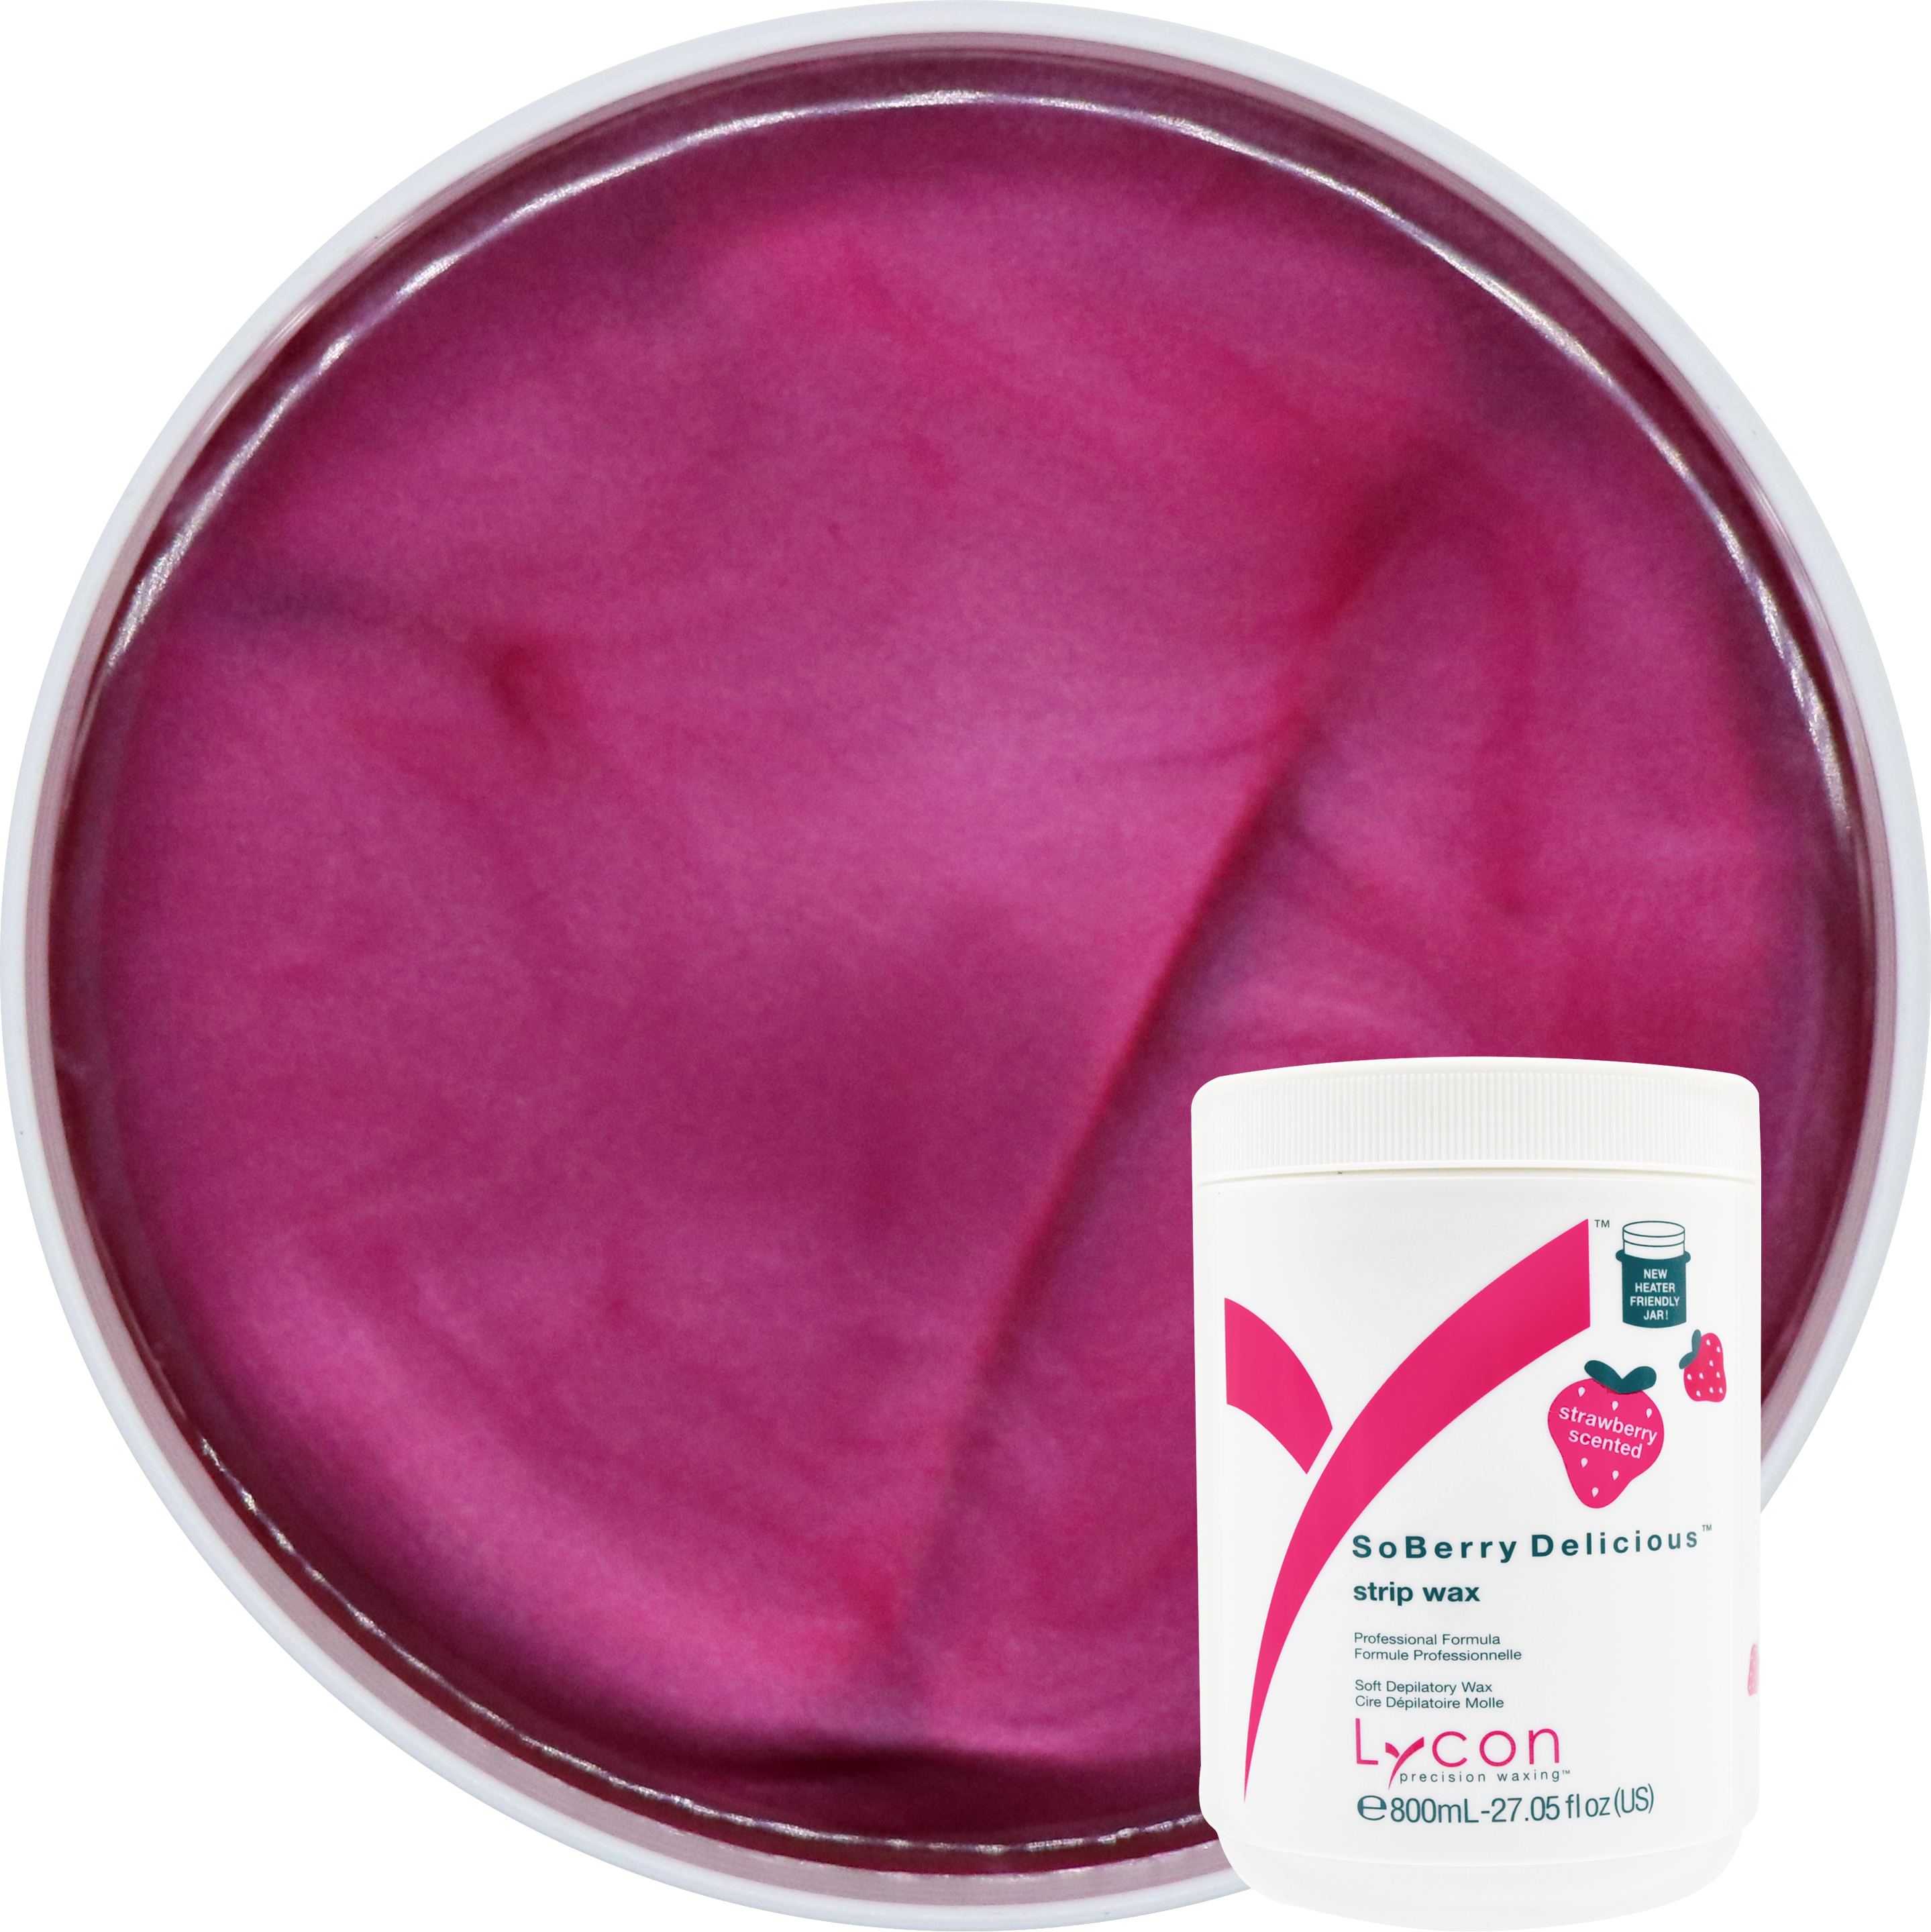 So Berry Delicious Strip Wax 800ml - Heater Friendly Jar for easy use